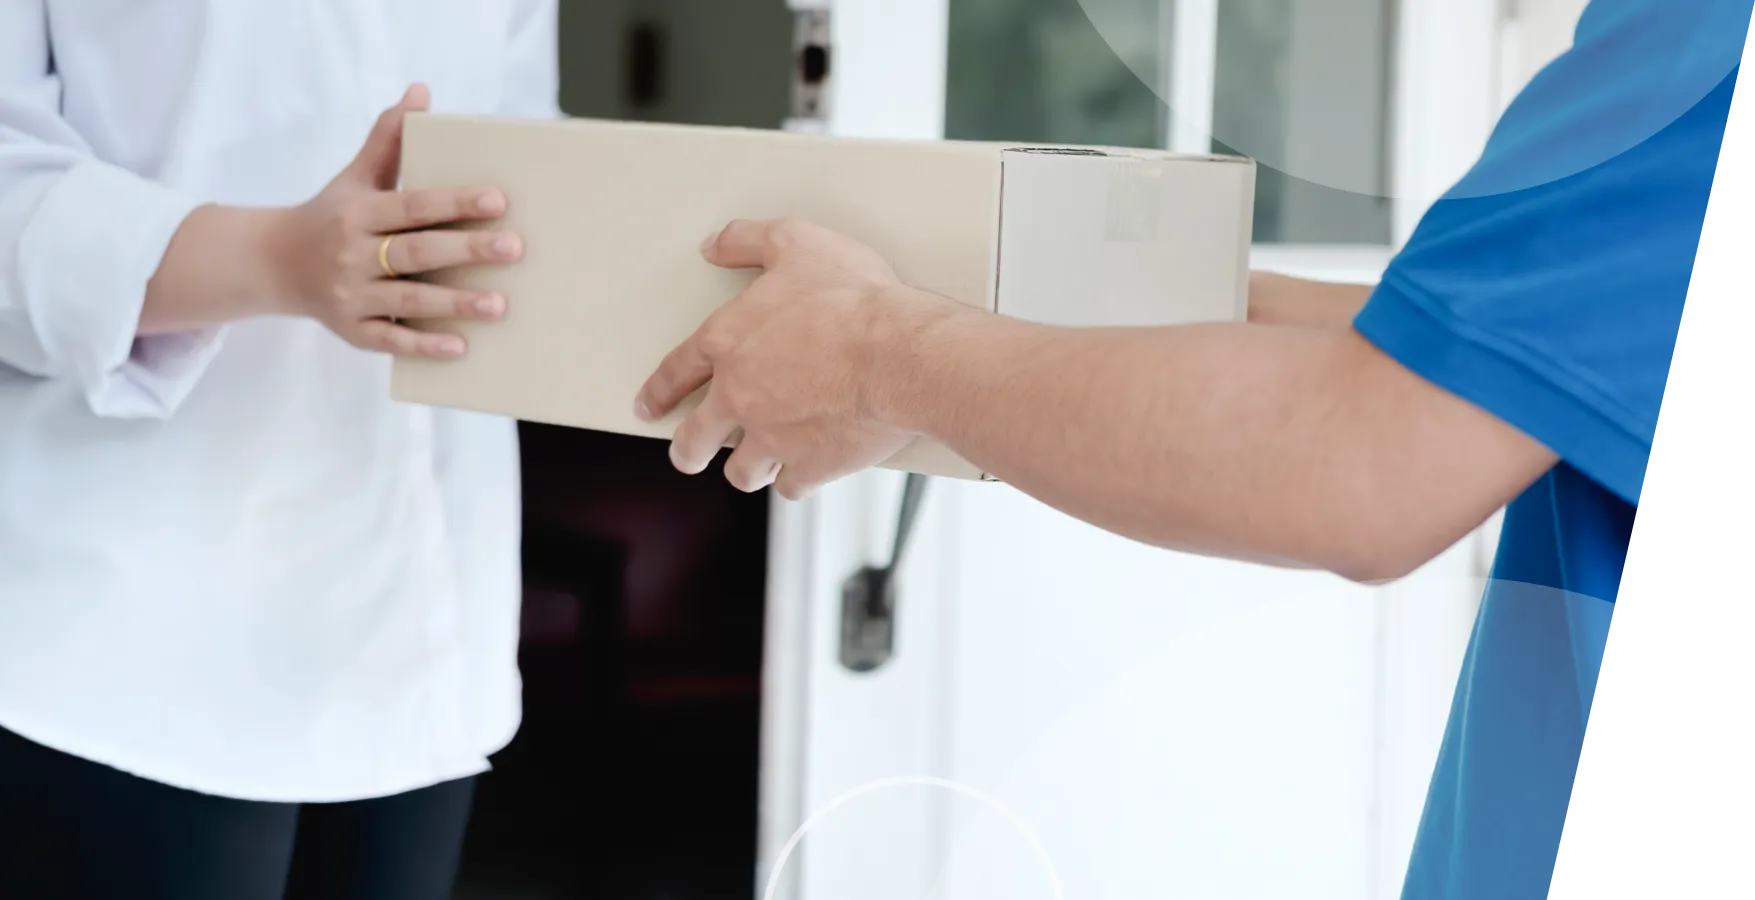 Delivery person handing a medical delivery box to another person.